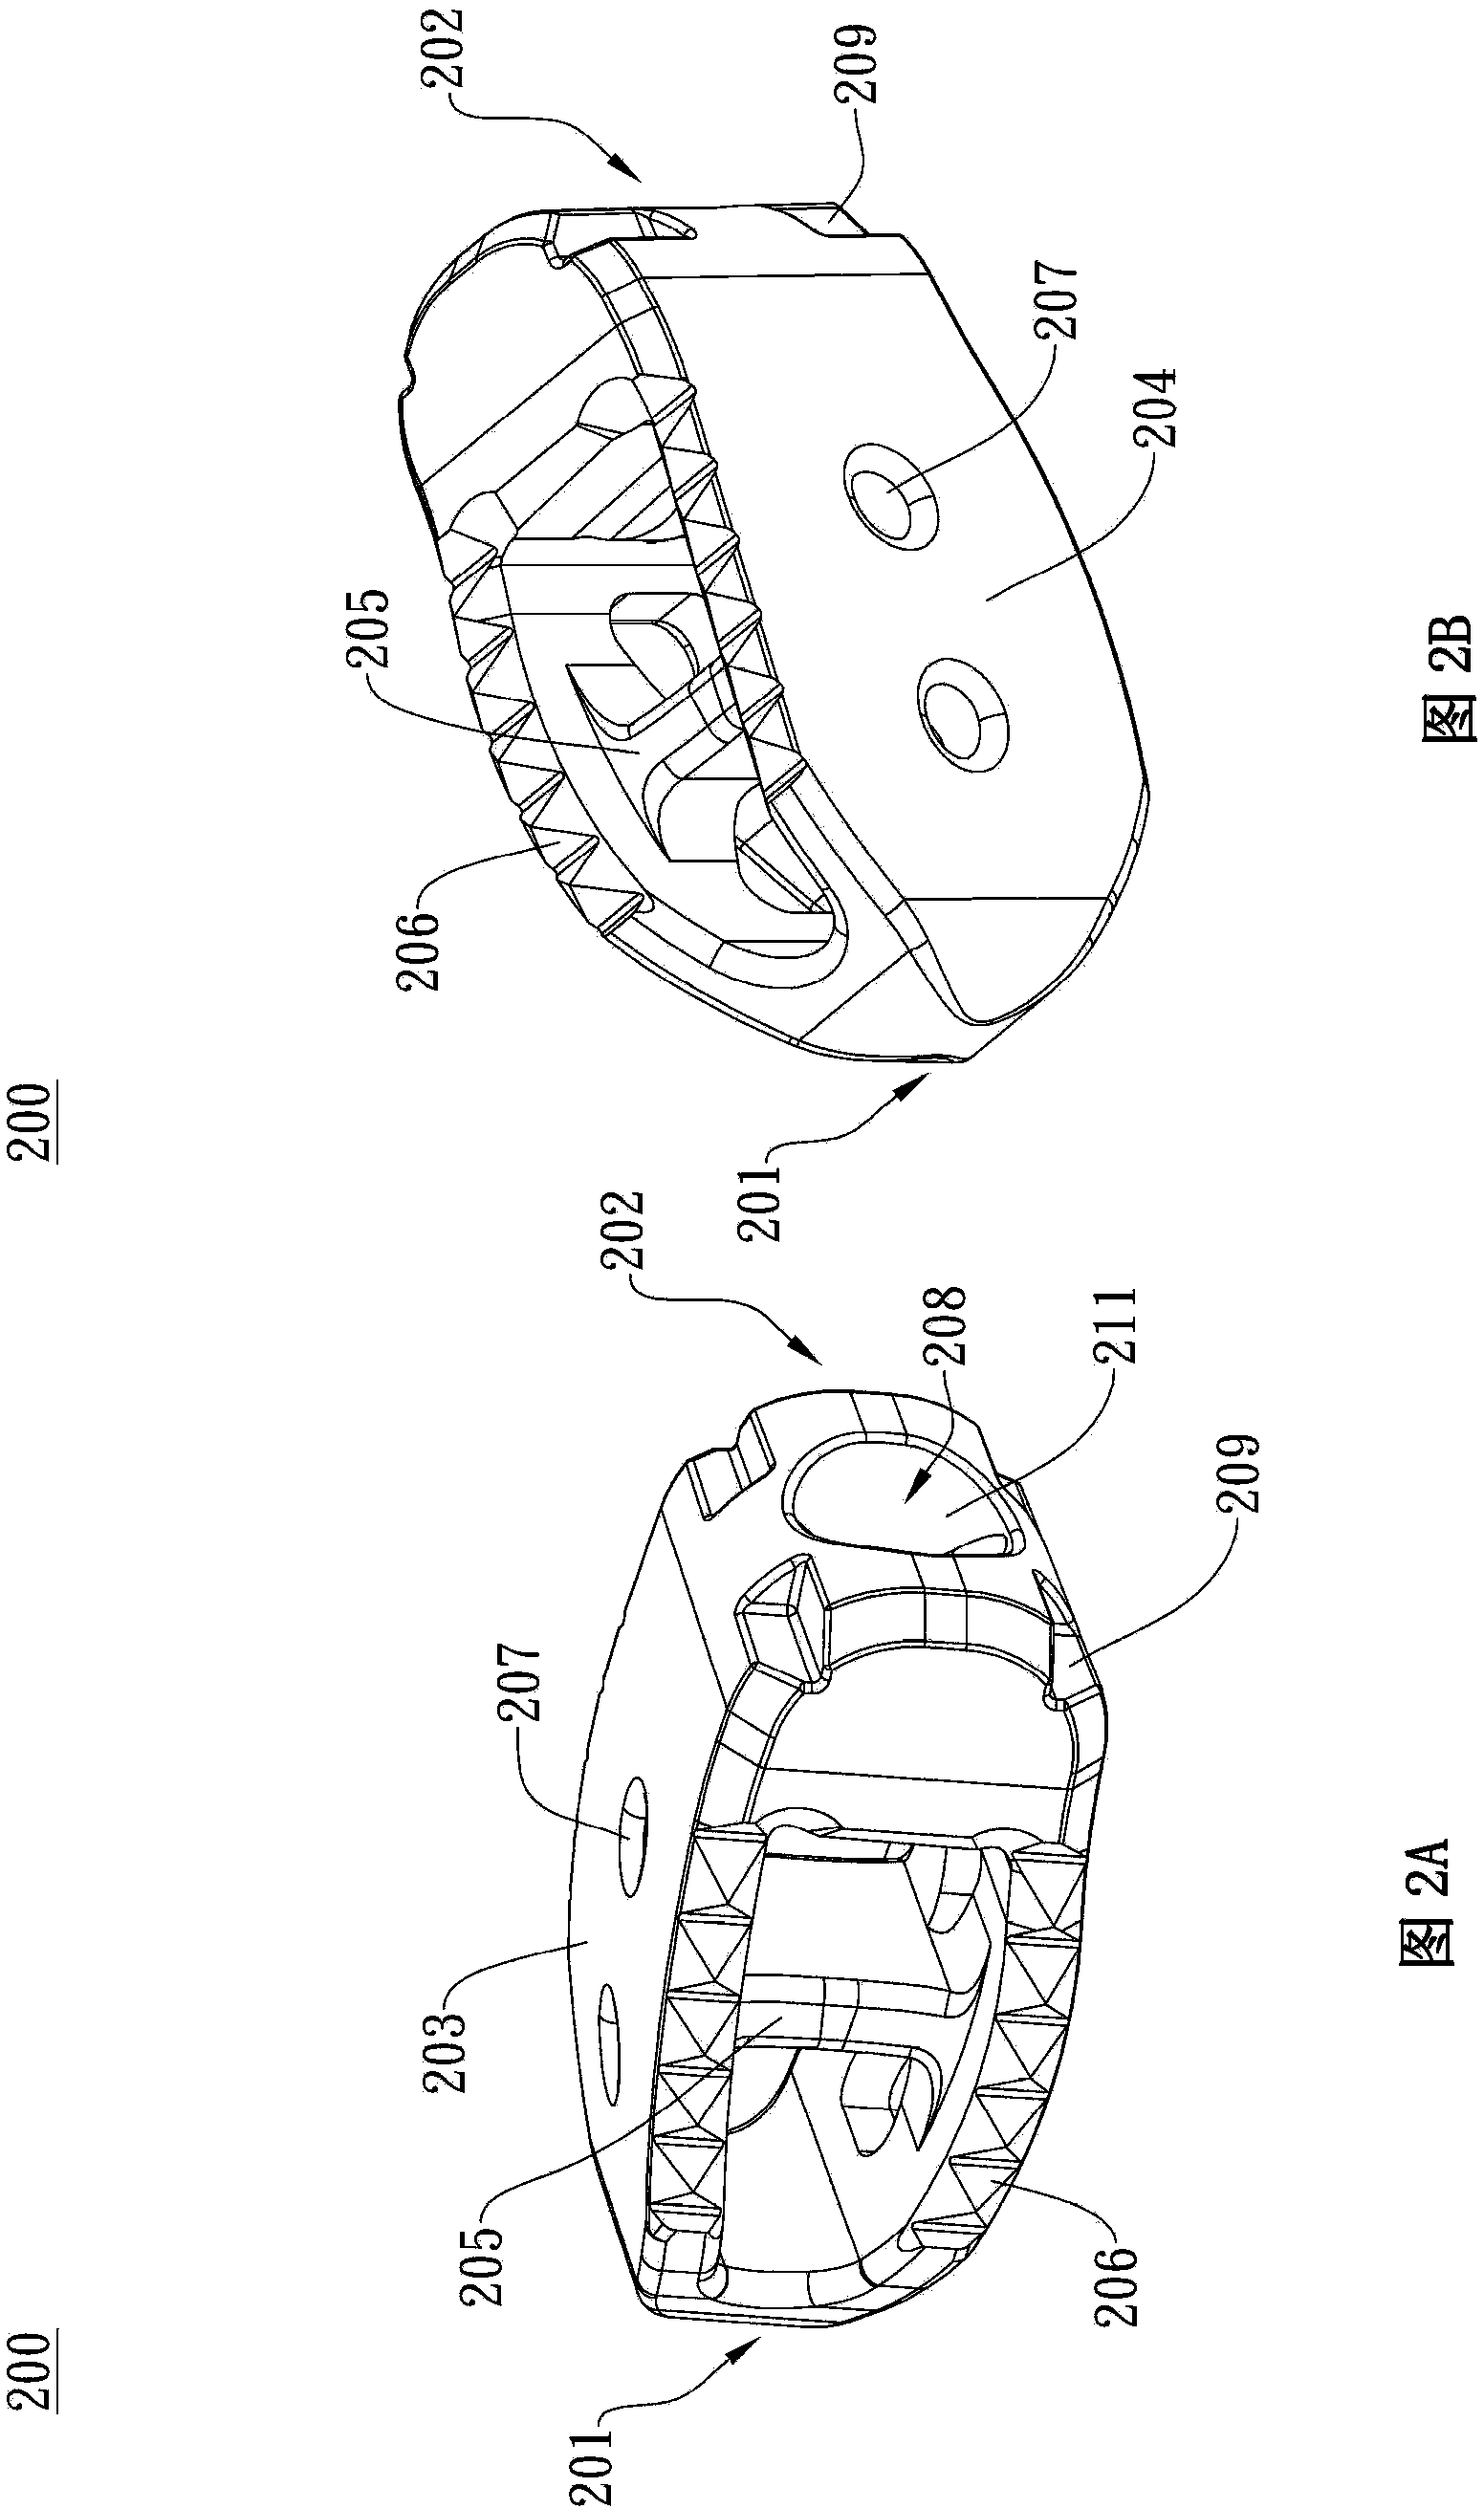 Spinal implant structure body and suites thereof